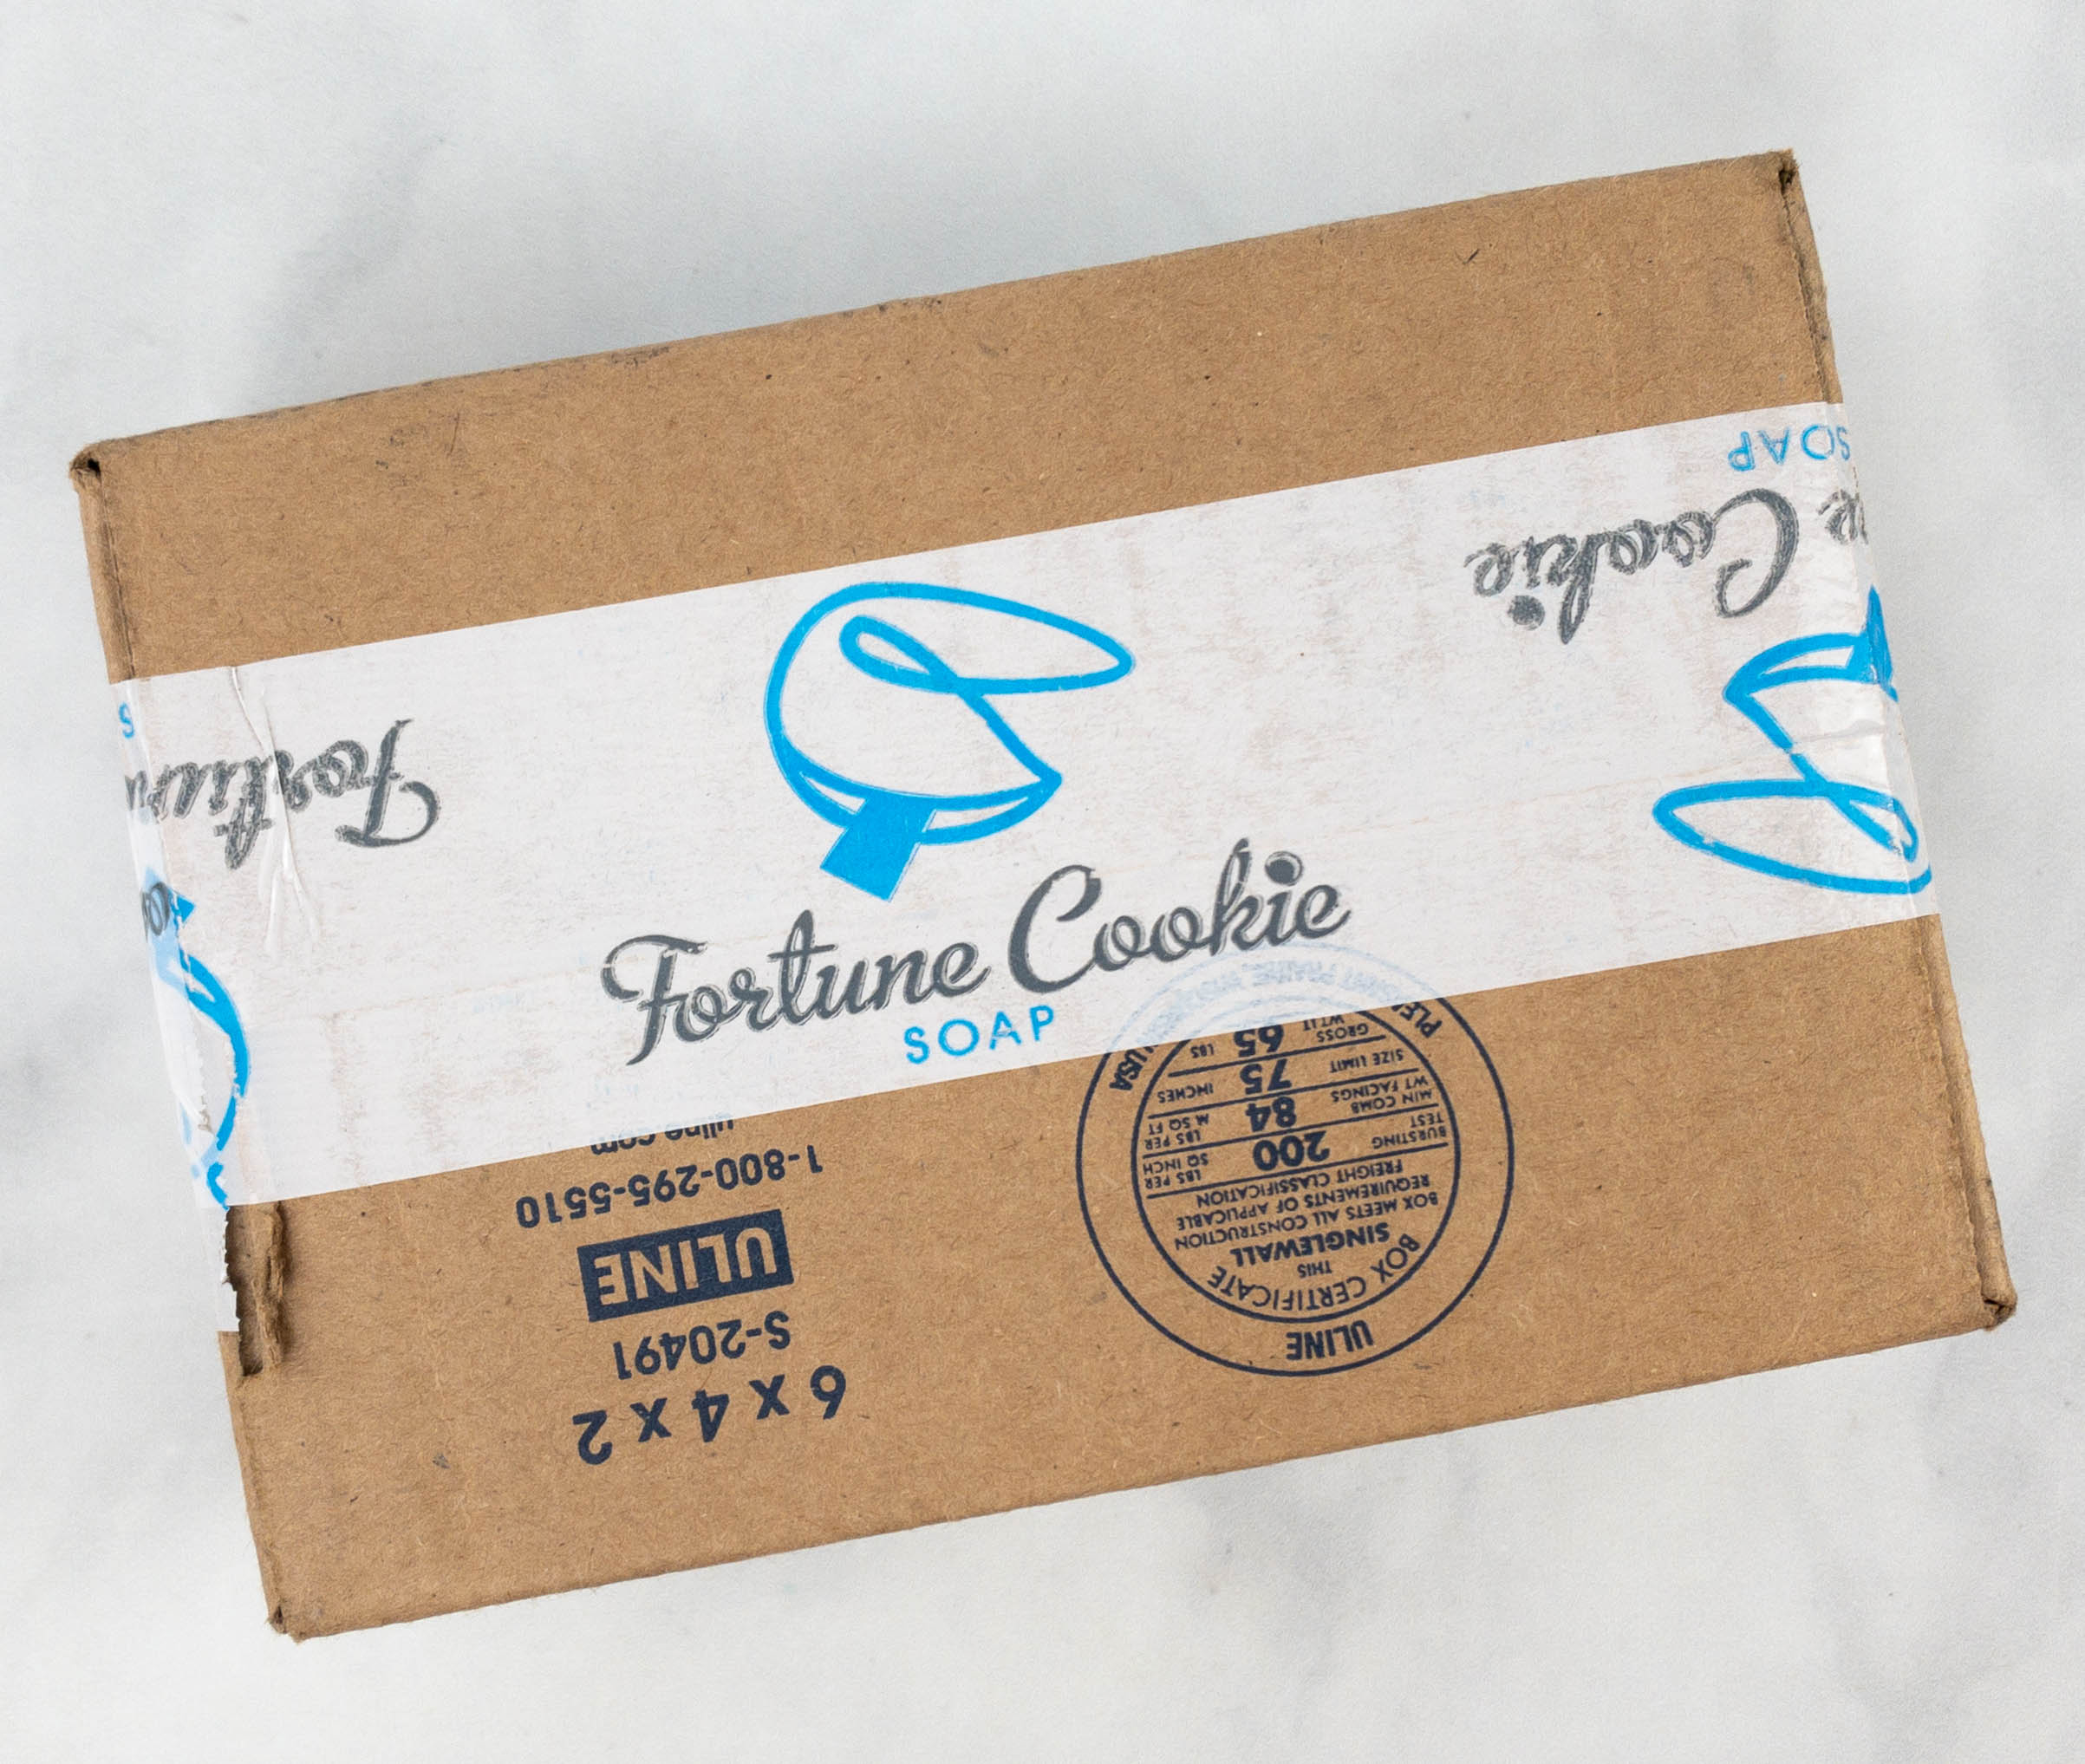 Fortune Cookie Soap Box Reviews: Everything You Need To Know